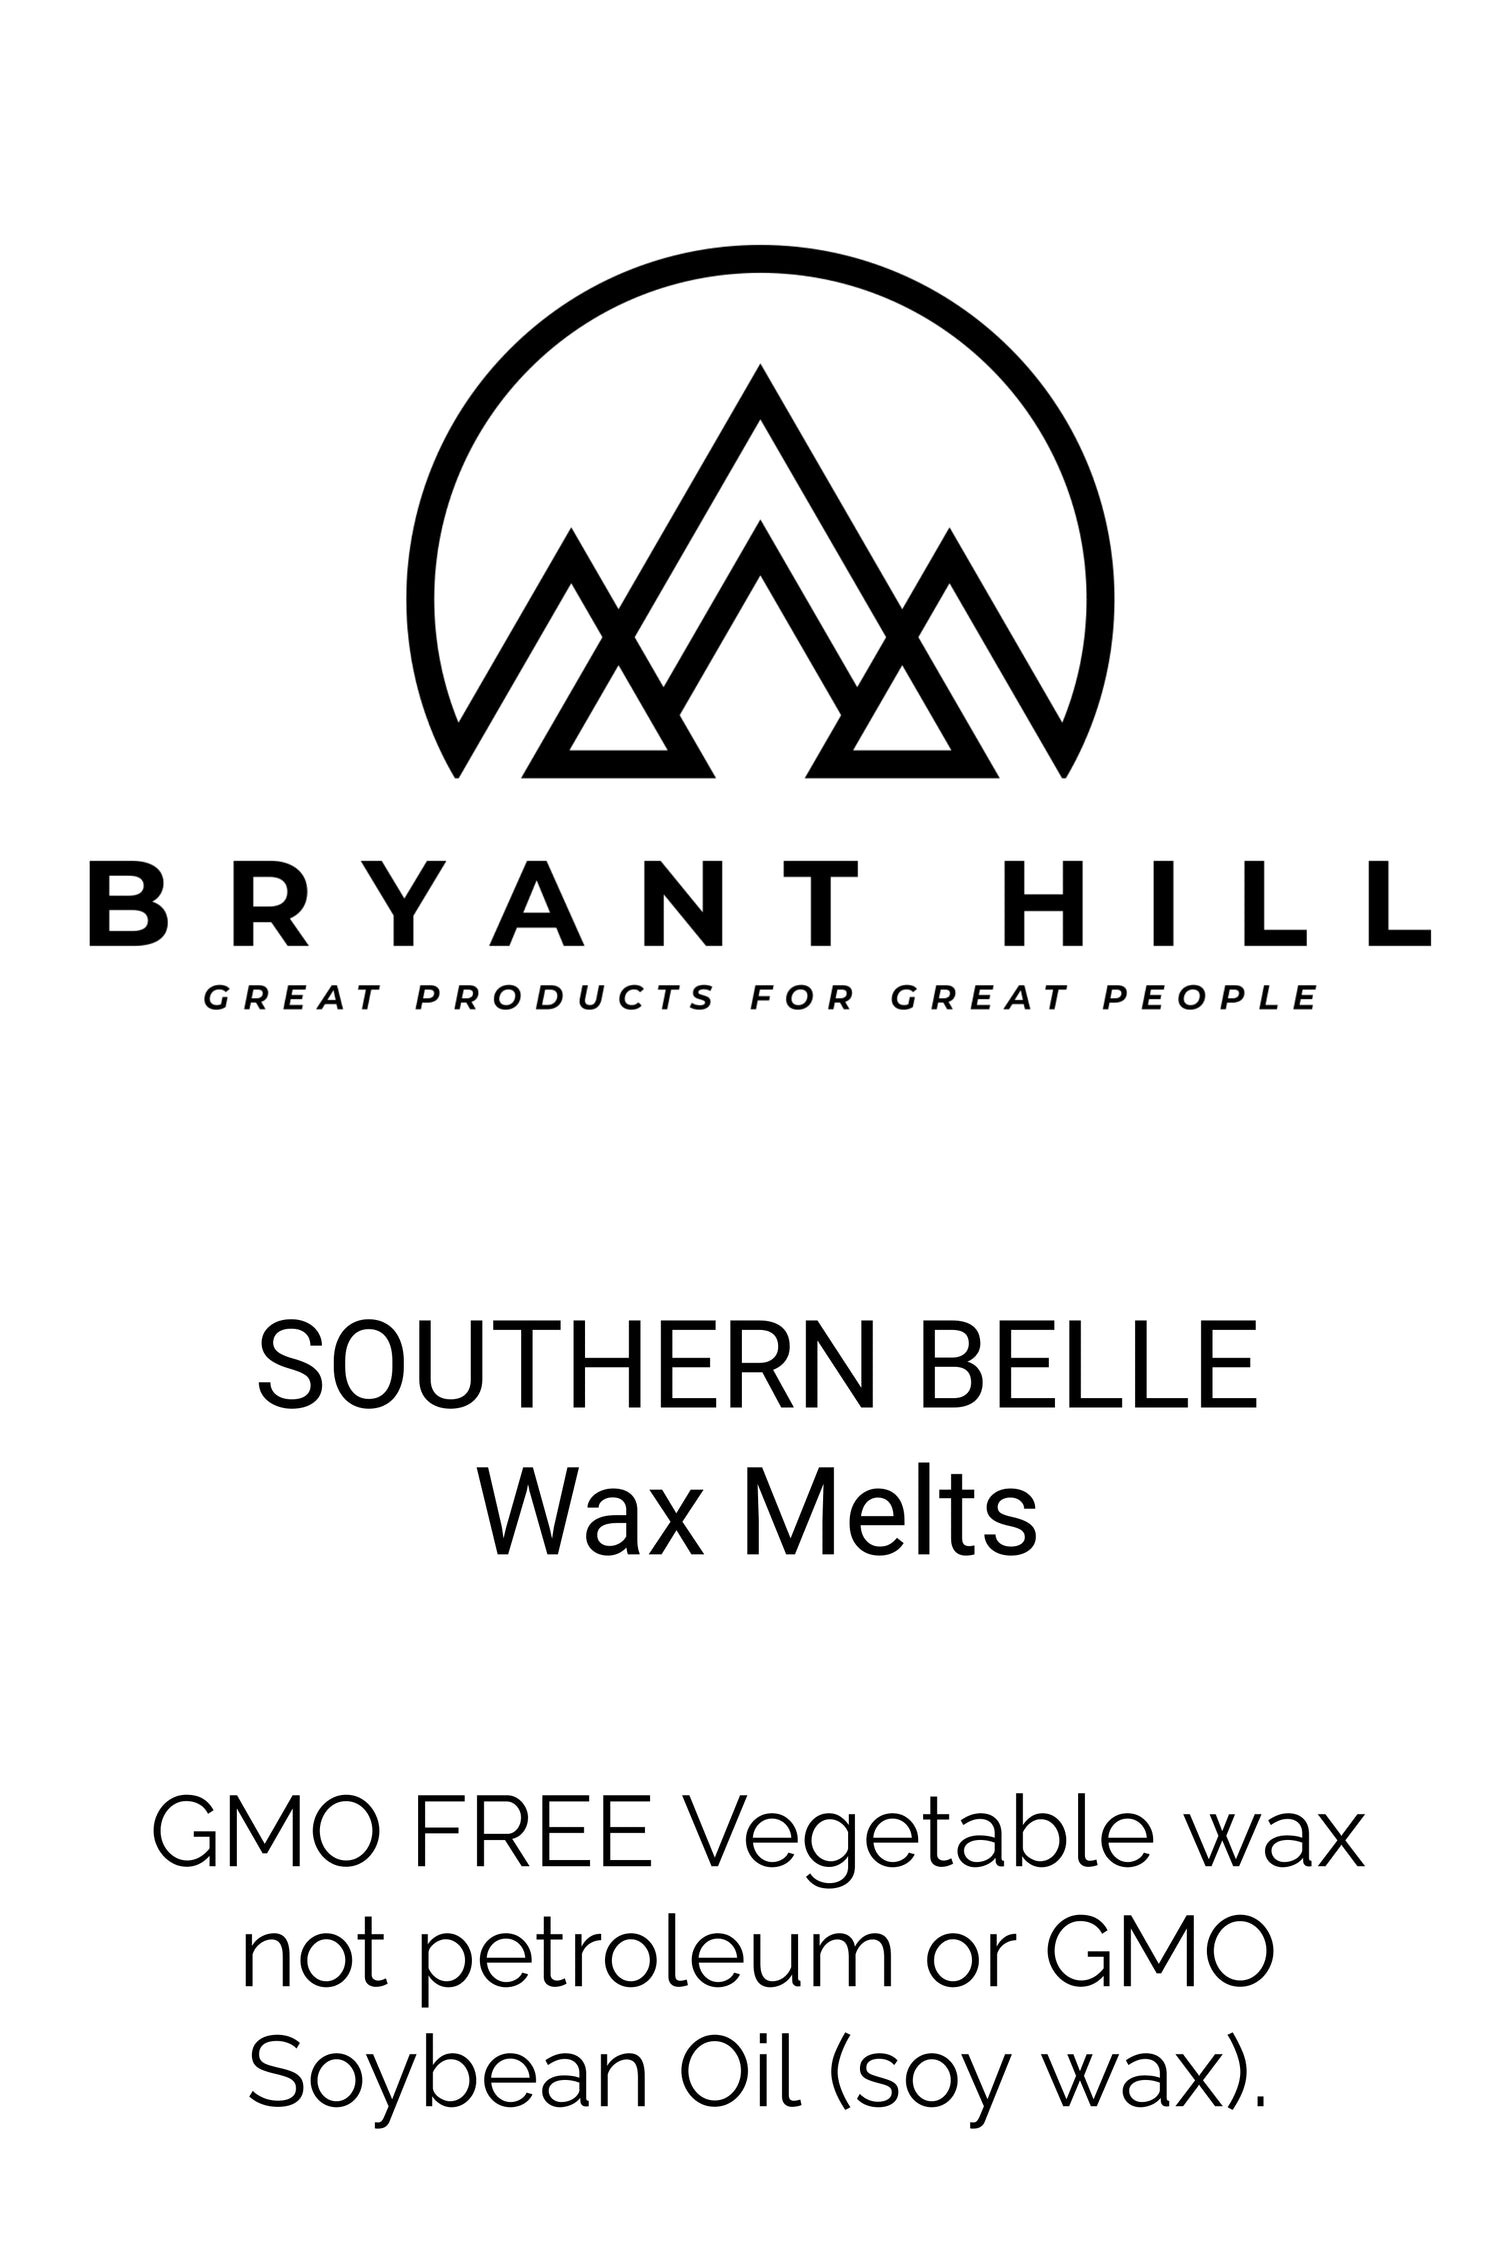 BRYANT-HILL-WAX-MELTS-SOUTHERN-BELLE